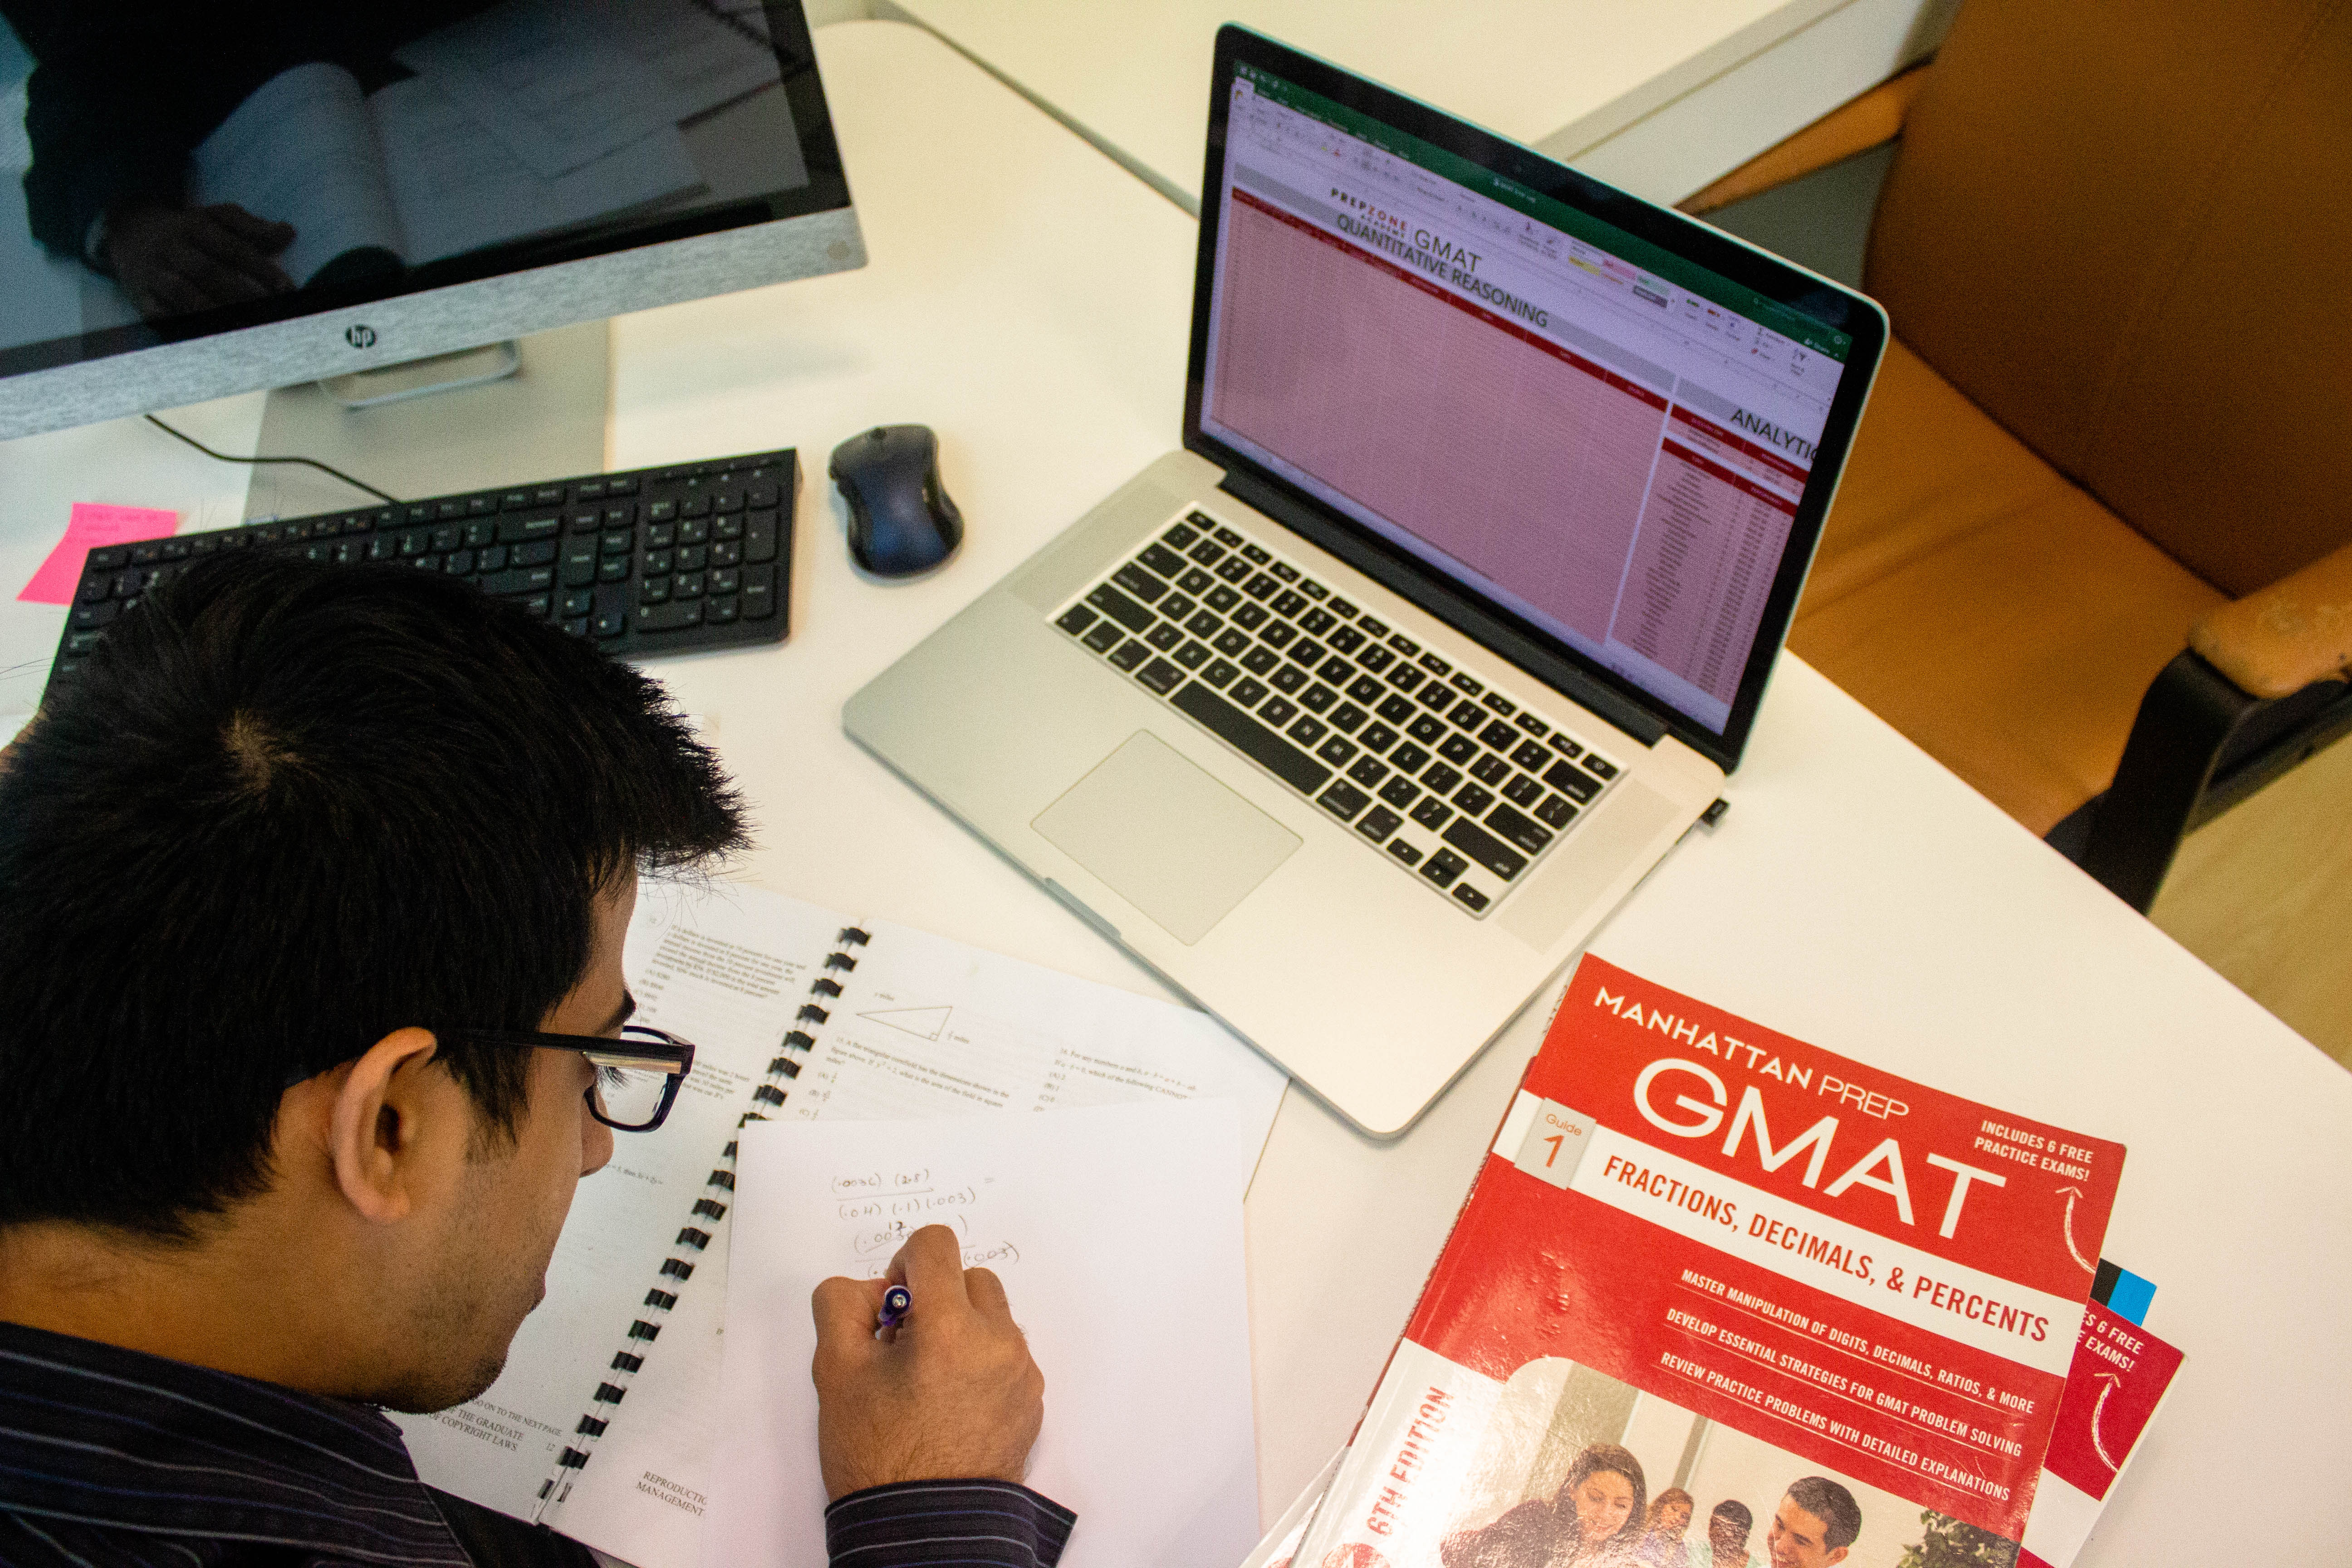 Use this GMAT Error Log to score 700+ on the GMAT